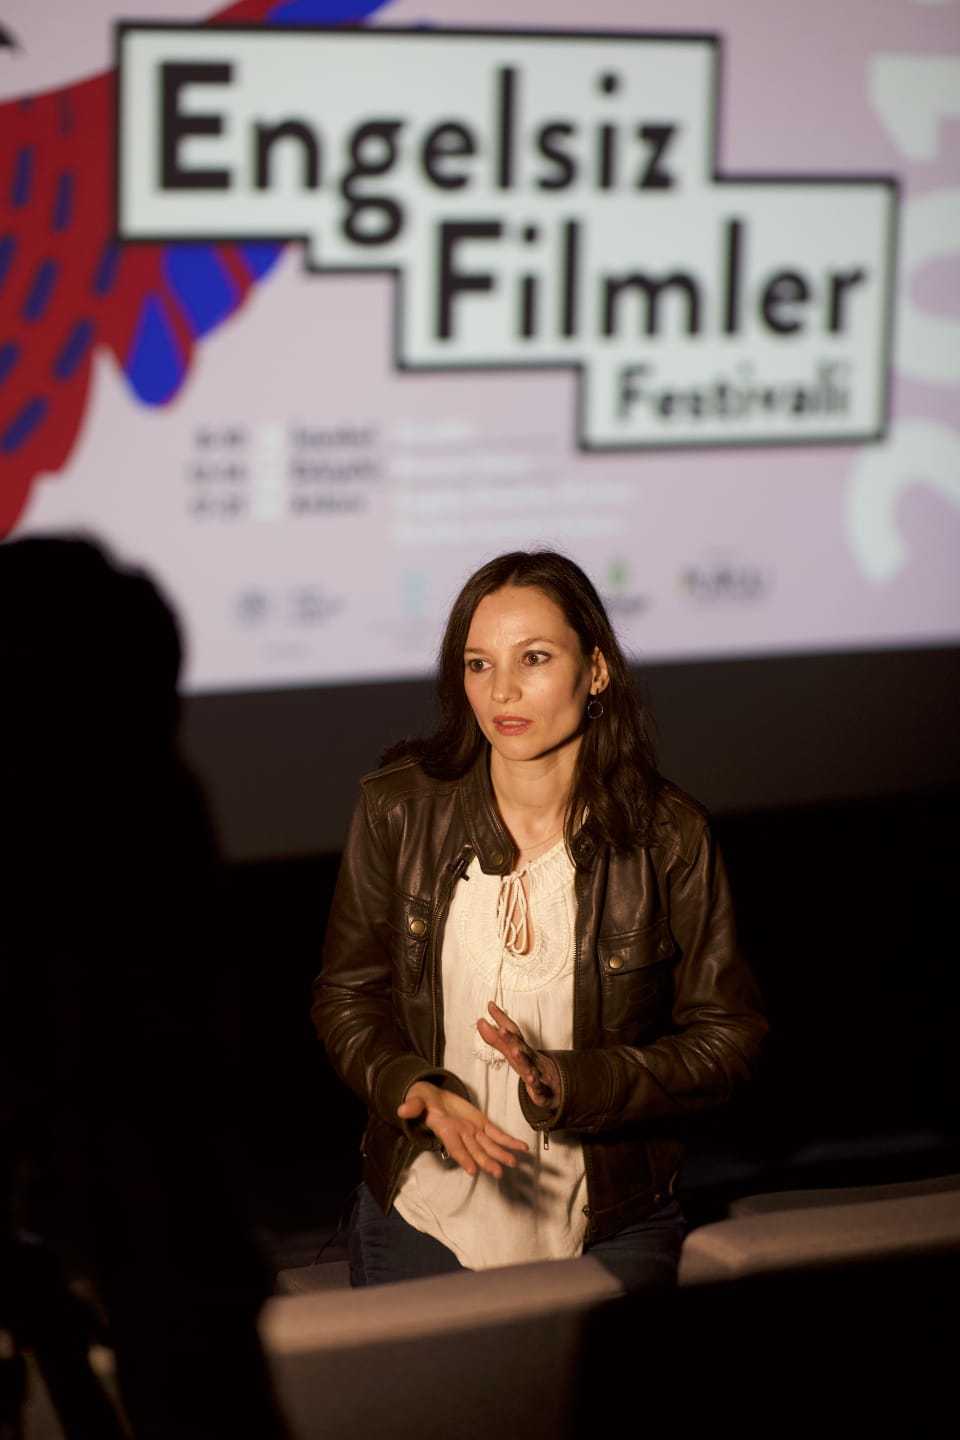 Ezgi Yalinalp is one of the co-founders of the Accessible Film Festival.